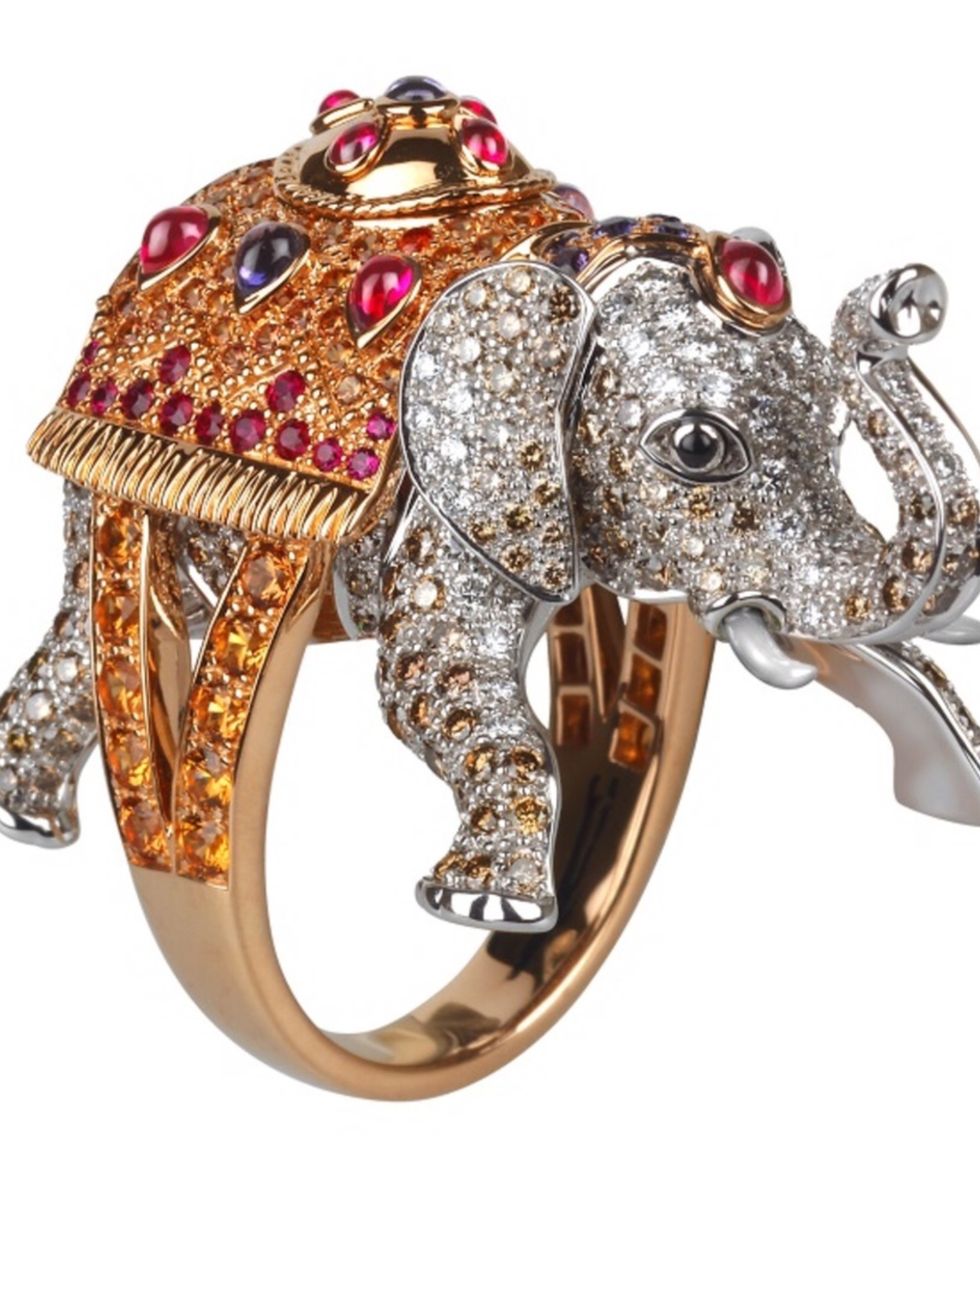 Metal, Elephant, Ring, Elephants and Mammoths, Engagement ring, Silver, Body jewelry, Working animal, Pre-engagement ring, Gemstone, 